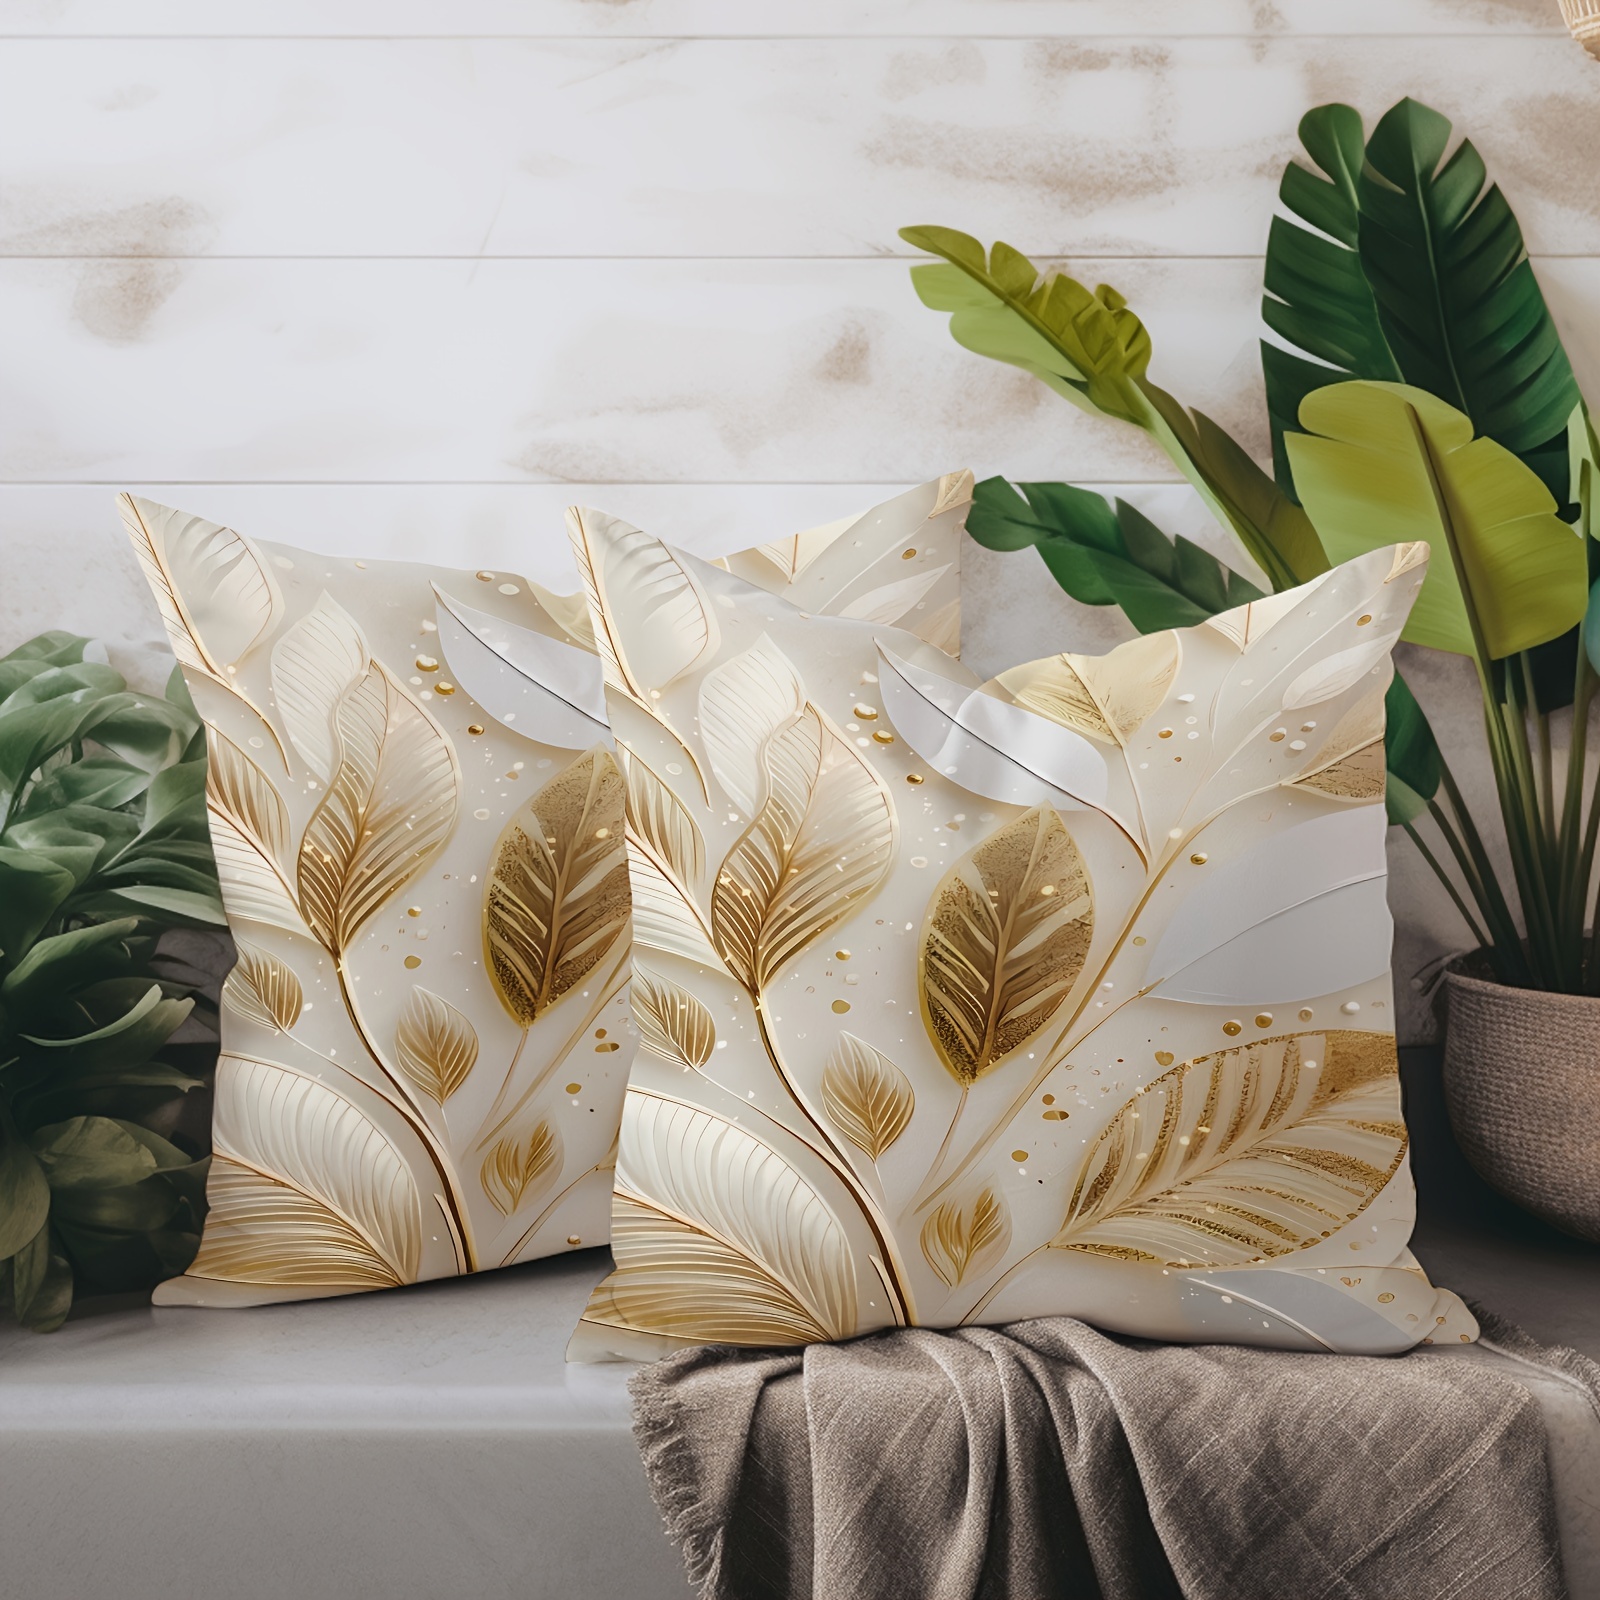 

2-piece Contemporary Leaf Design Velvet Throw Pillow Covers, 18x18 Inches - Zippered, Easy To Clean For Living Room & Bedroom Decor Queen Size Comforter Set With Curtains Linen Cases